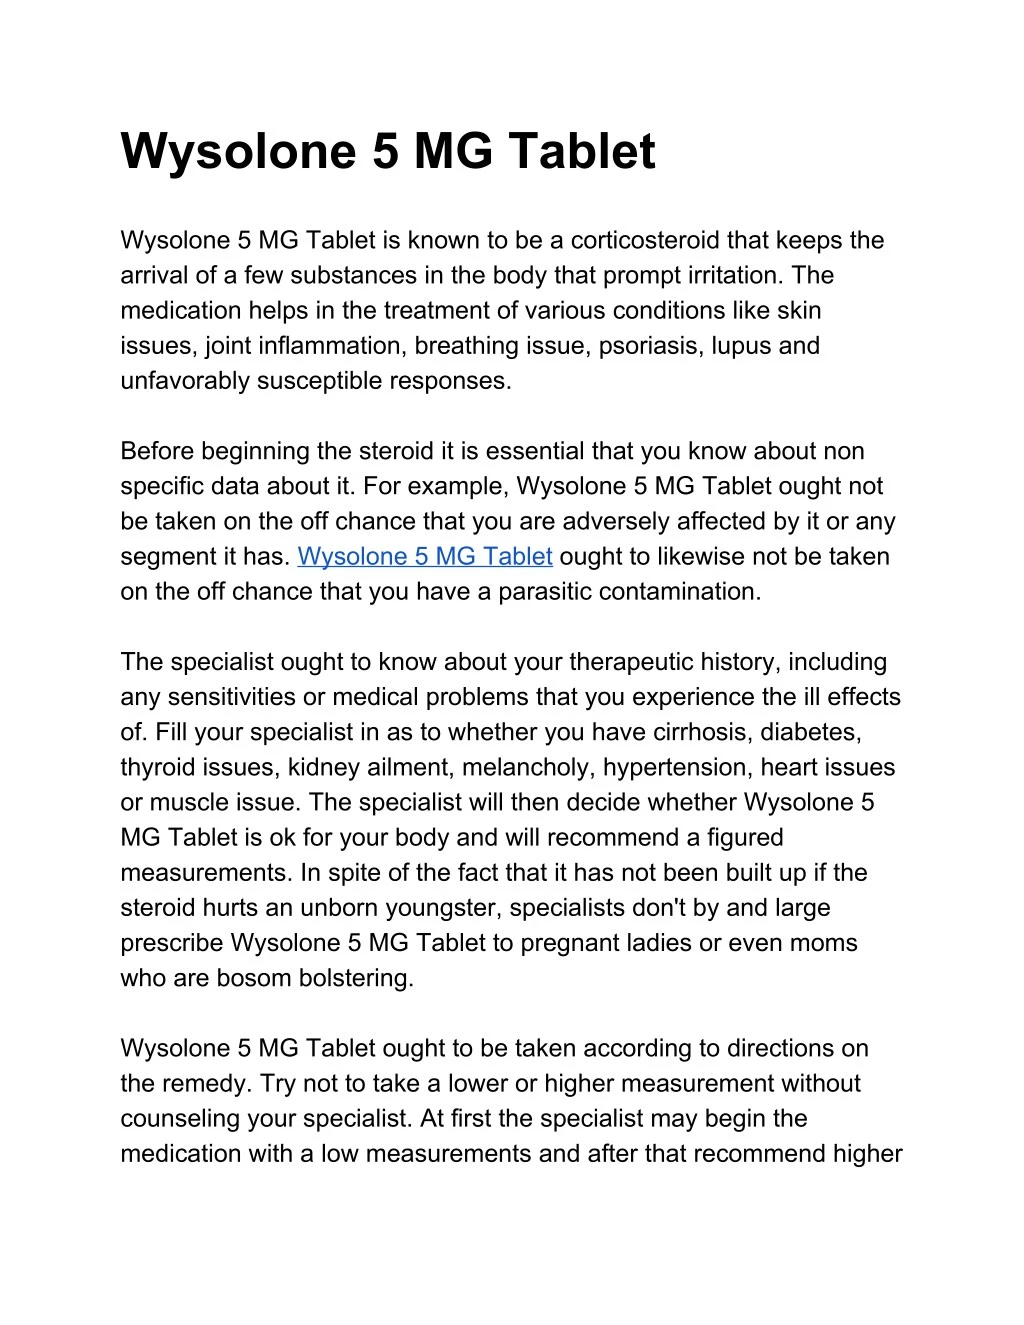 wysolone 5 mg tablet wysolone 5 mg tablet